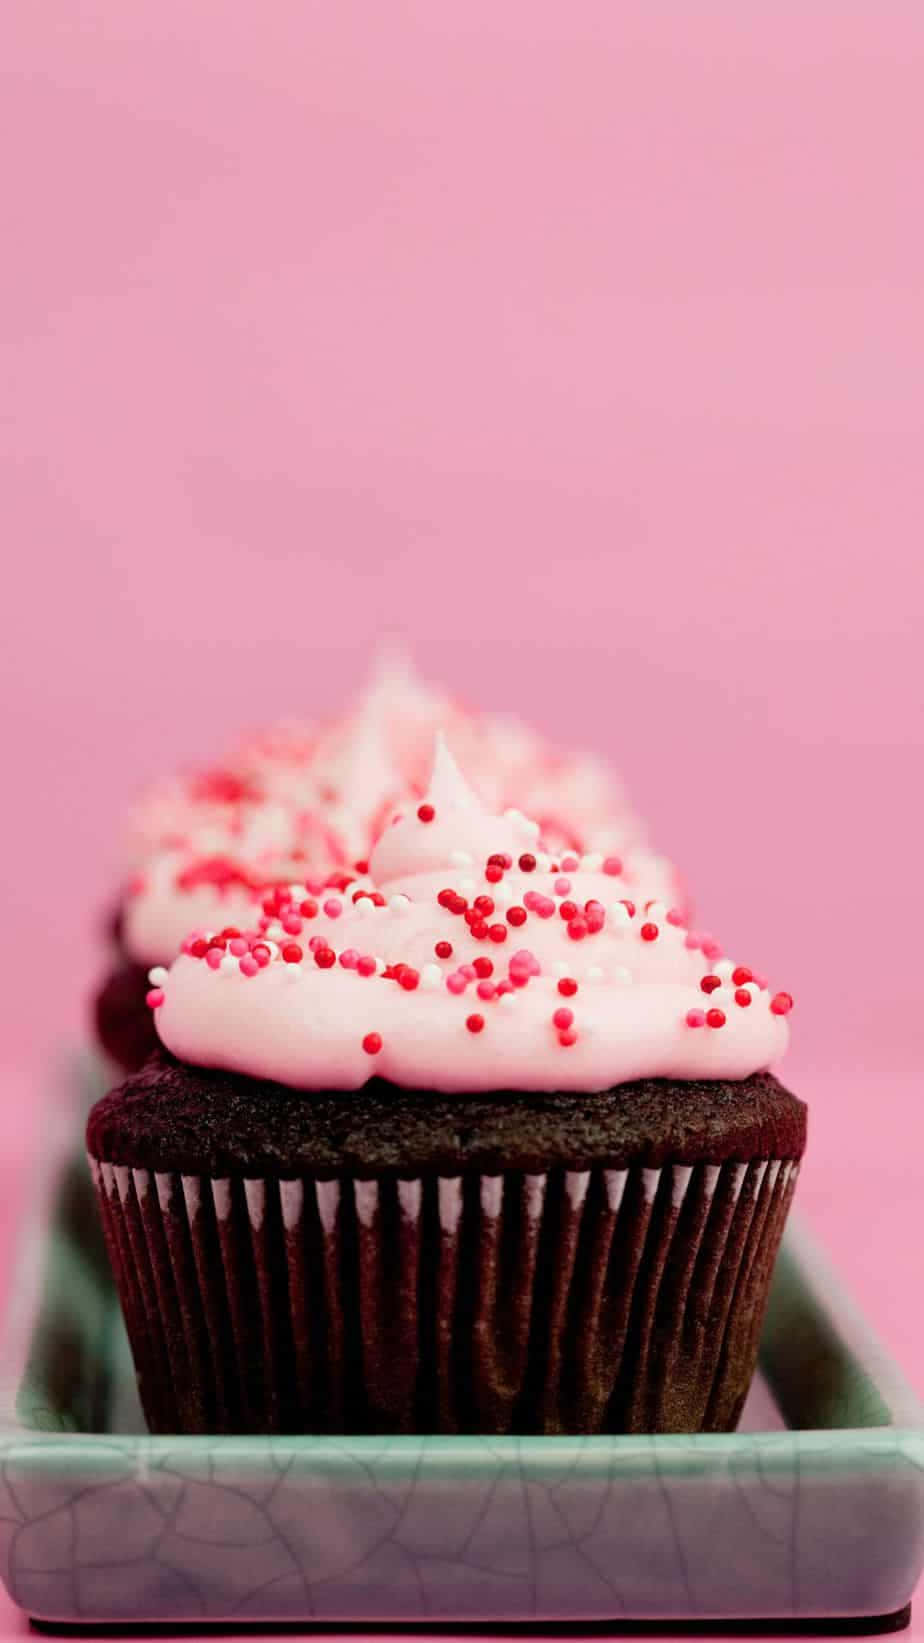 Delicious Cute Cupcake with Colorful Sprinkles and Pink Icing Wallpaper